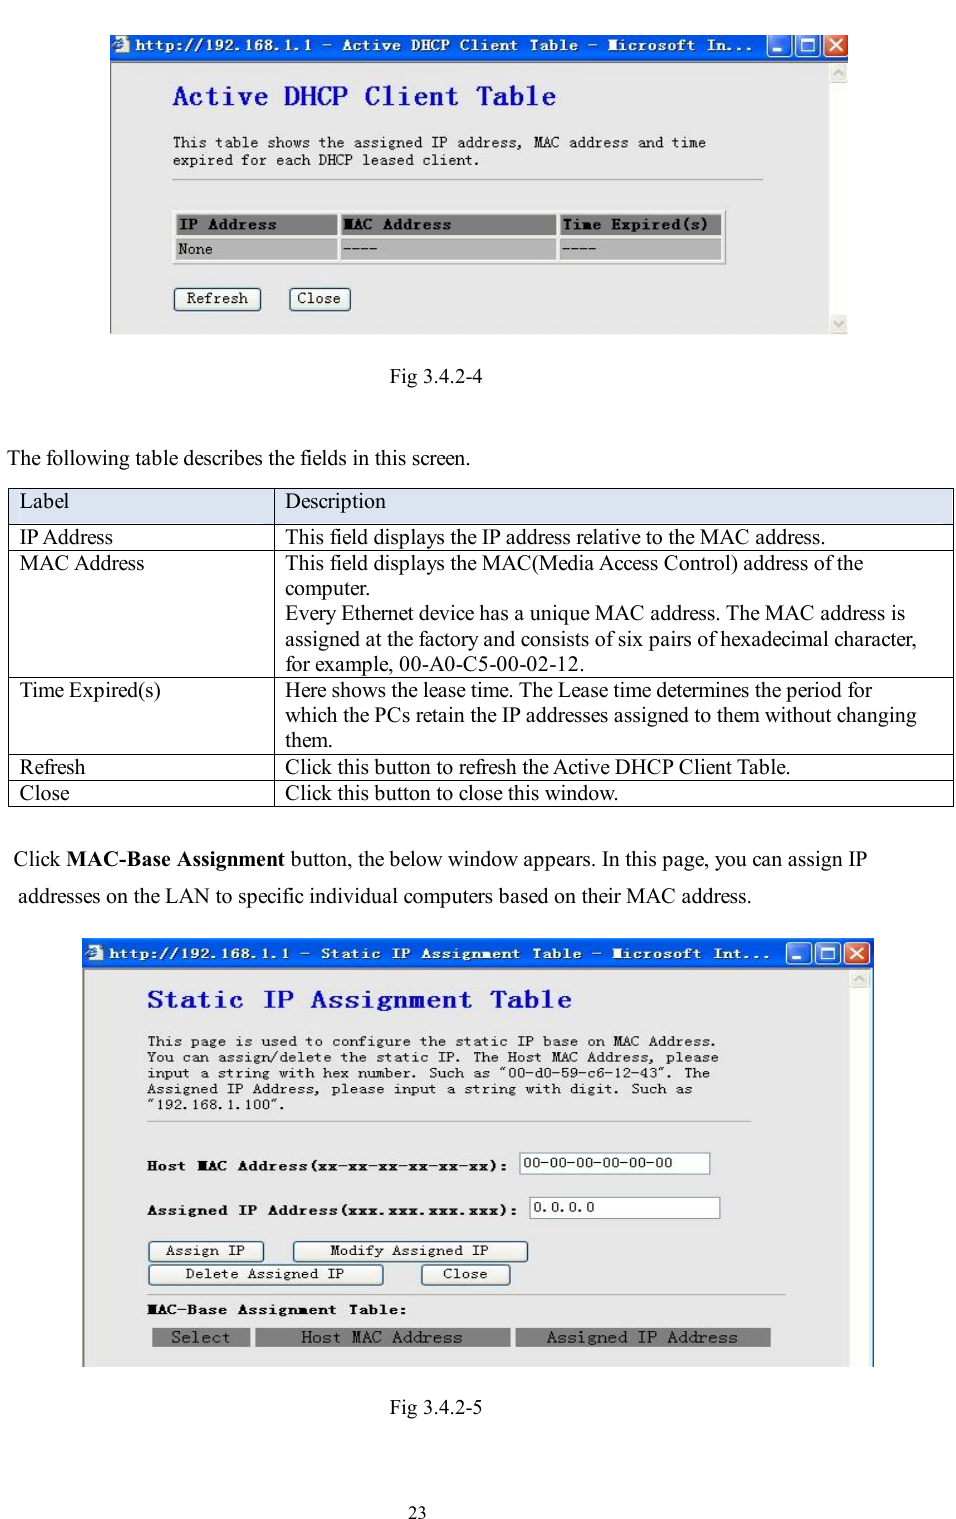                                                                     23  Fig 3.4.2-4  The following table describes the fields in this screen. Label  Description IP Address  This field displays the IP address relative to the MAC address. MAC Address  This field displays the MAC(Media Access Control) address of the computer. Every Ethernet device has a unique MAC address. The MAC address is assigned at the factory and consists of six pairs of hexadecimal character, for example, 00-A0-C5-00-02-12. Time Expired(s)  Here shows the lease time. The Lease time determines the period for which the PCs retain the IP addresses assigned to them without changing them. Refresh  Click this button to refresh the Active DHCP Client Table. Close  Click this button to close this window.  Click MAC-Base Assignment button, the below window appears. In this page, you can assign IP addresses on the LAN to specific individual computers based on their MAC address.  Fig 3.4.2-5  